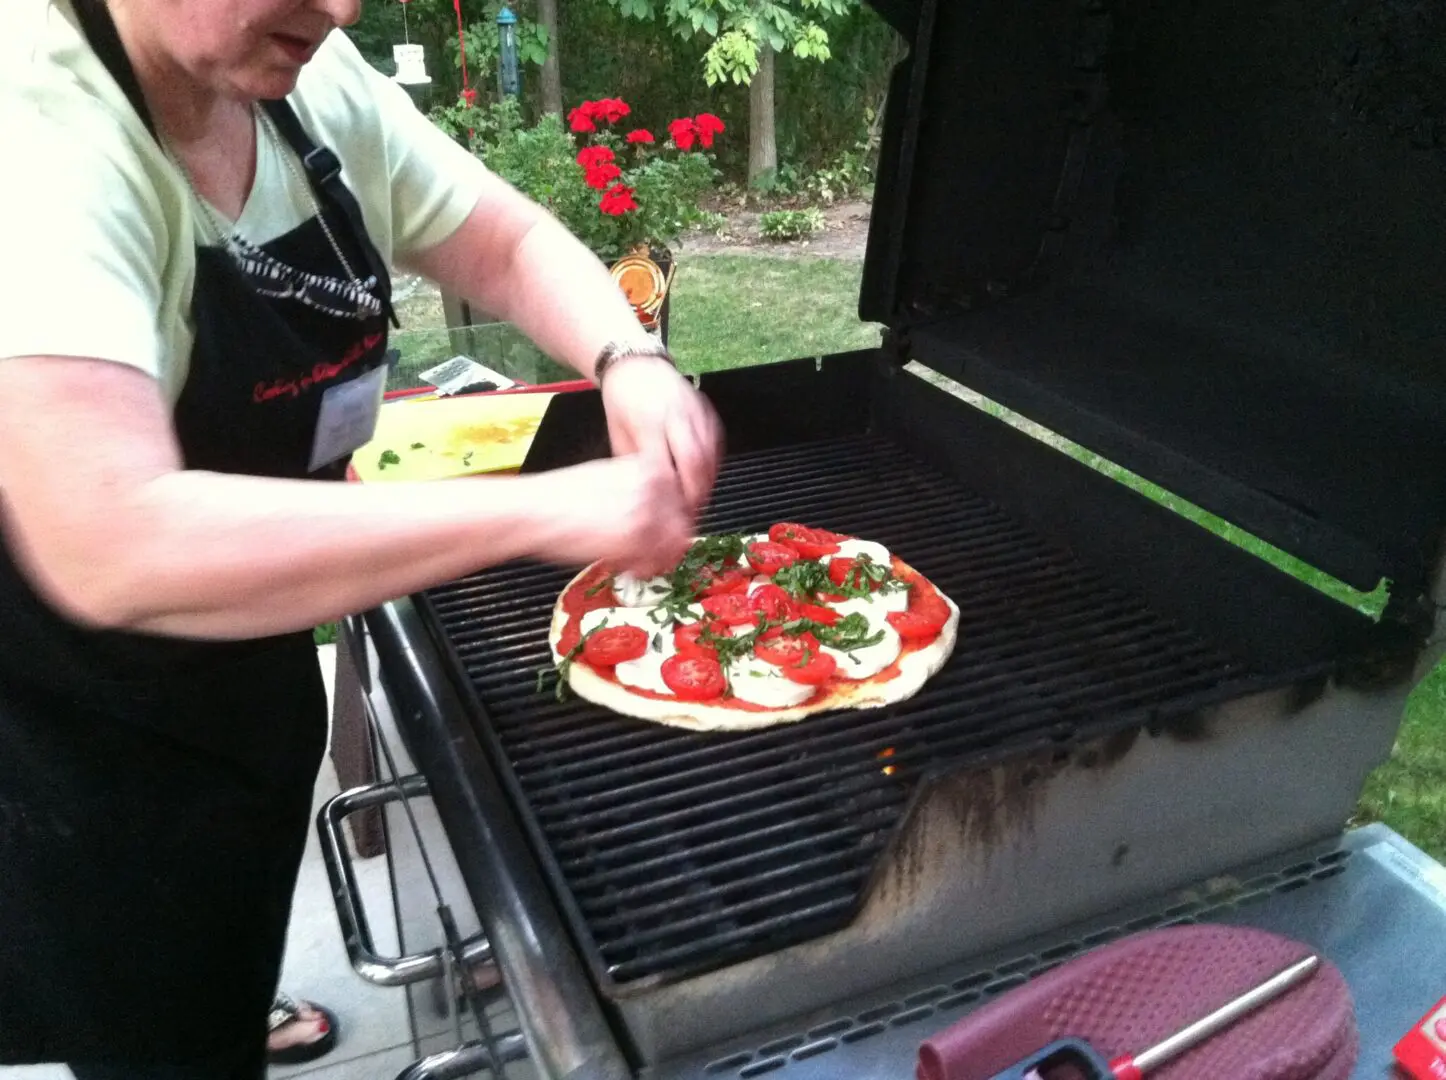 A woman cooking pizza on grill